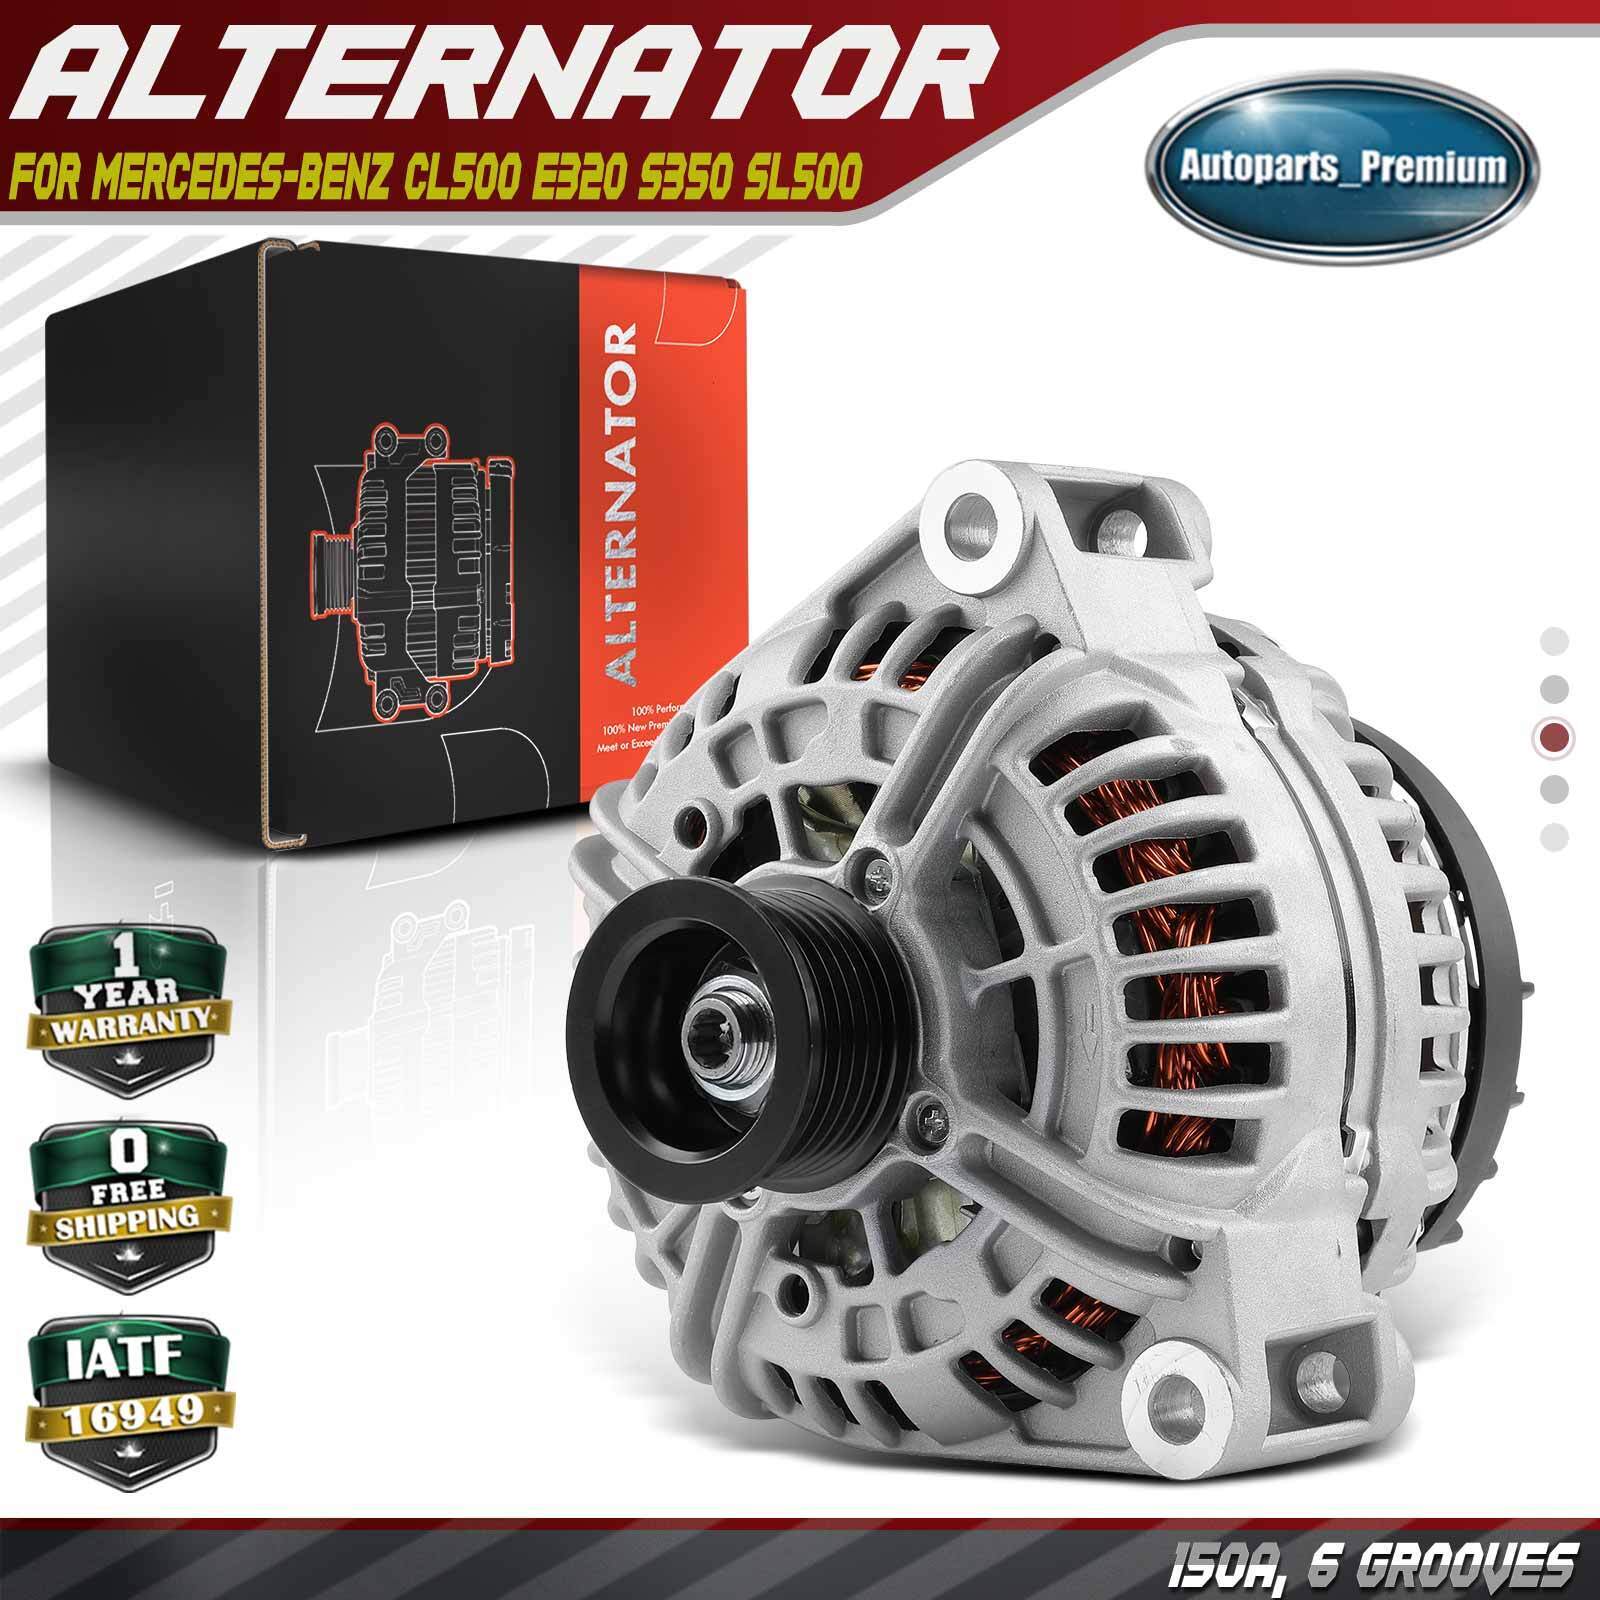 Alternator for Mercedes-Benz CL500 E320 S350 SL500 150A 12V CW 6-Groove Pulley